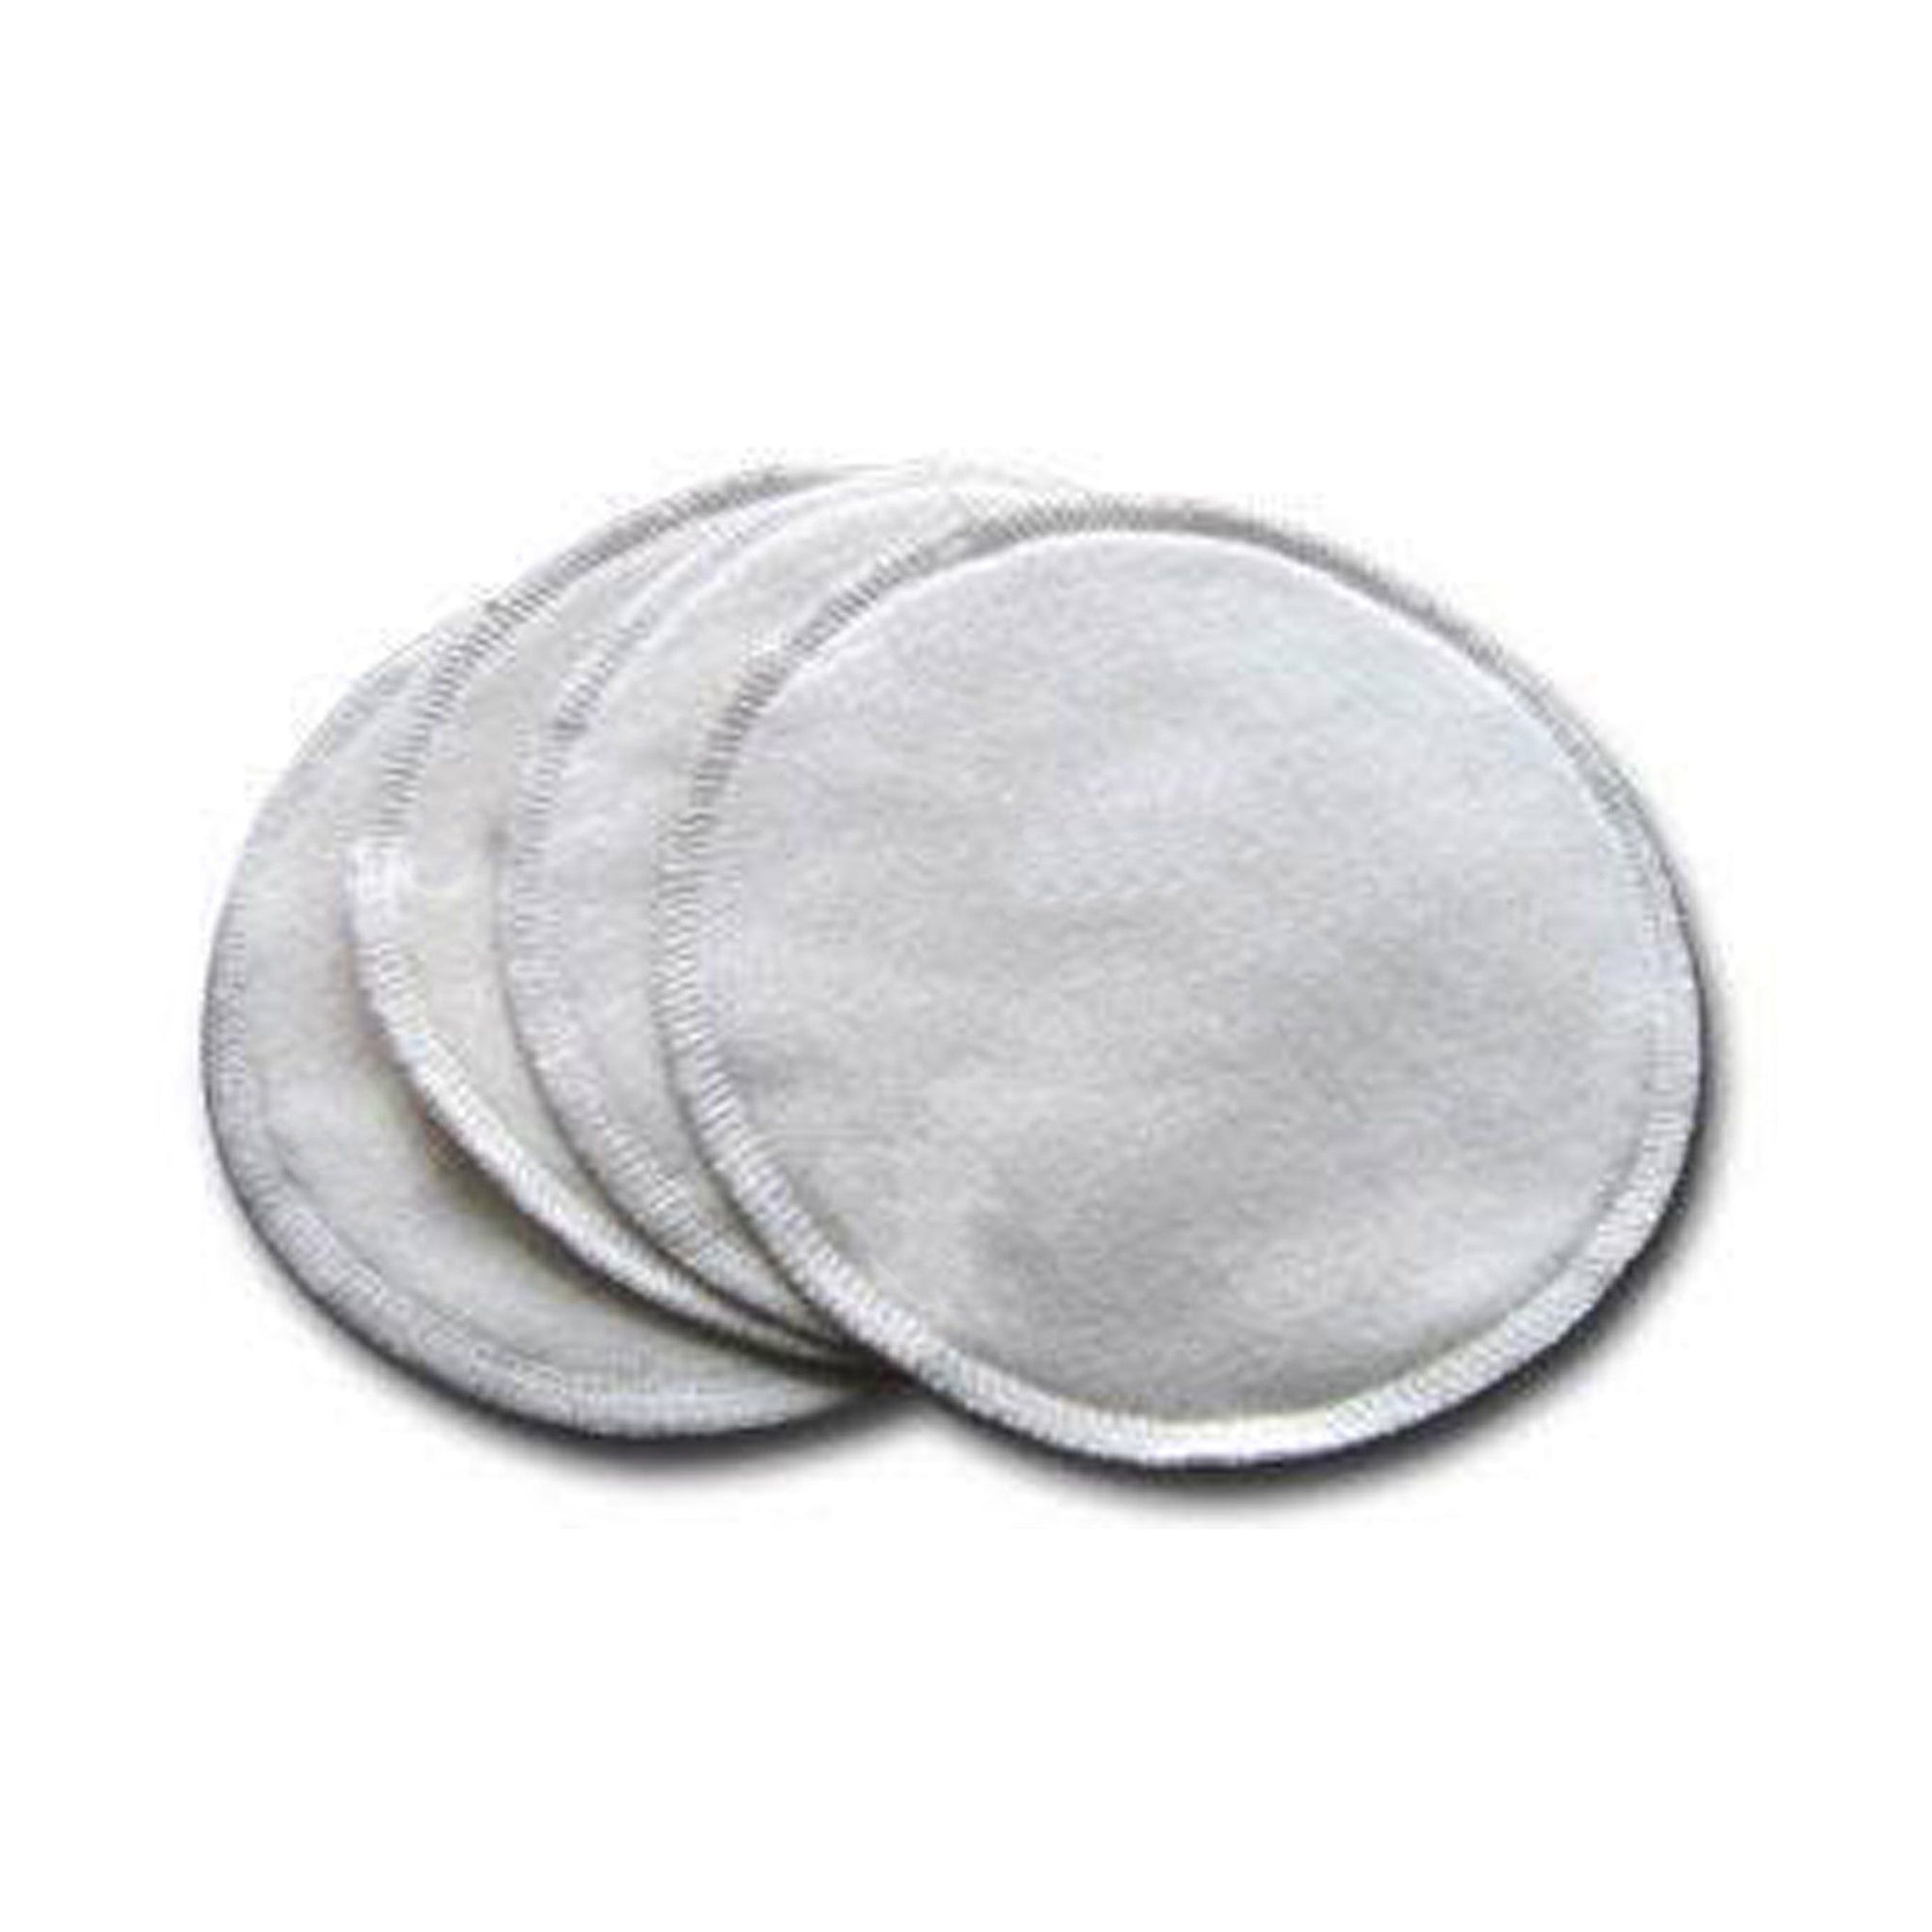 Complimentary LeakProof Bamboo Reusable Nursing Pads